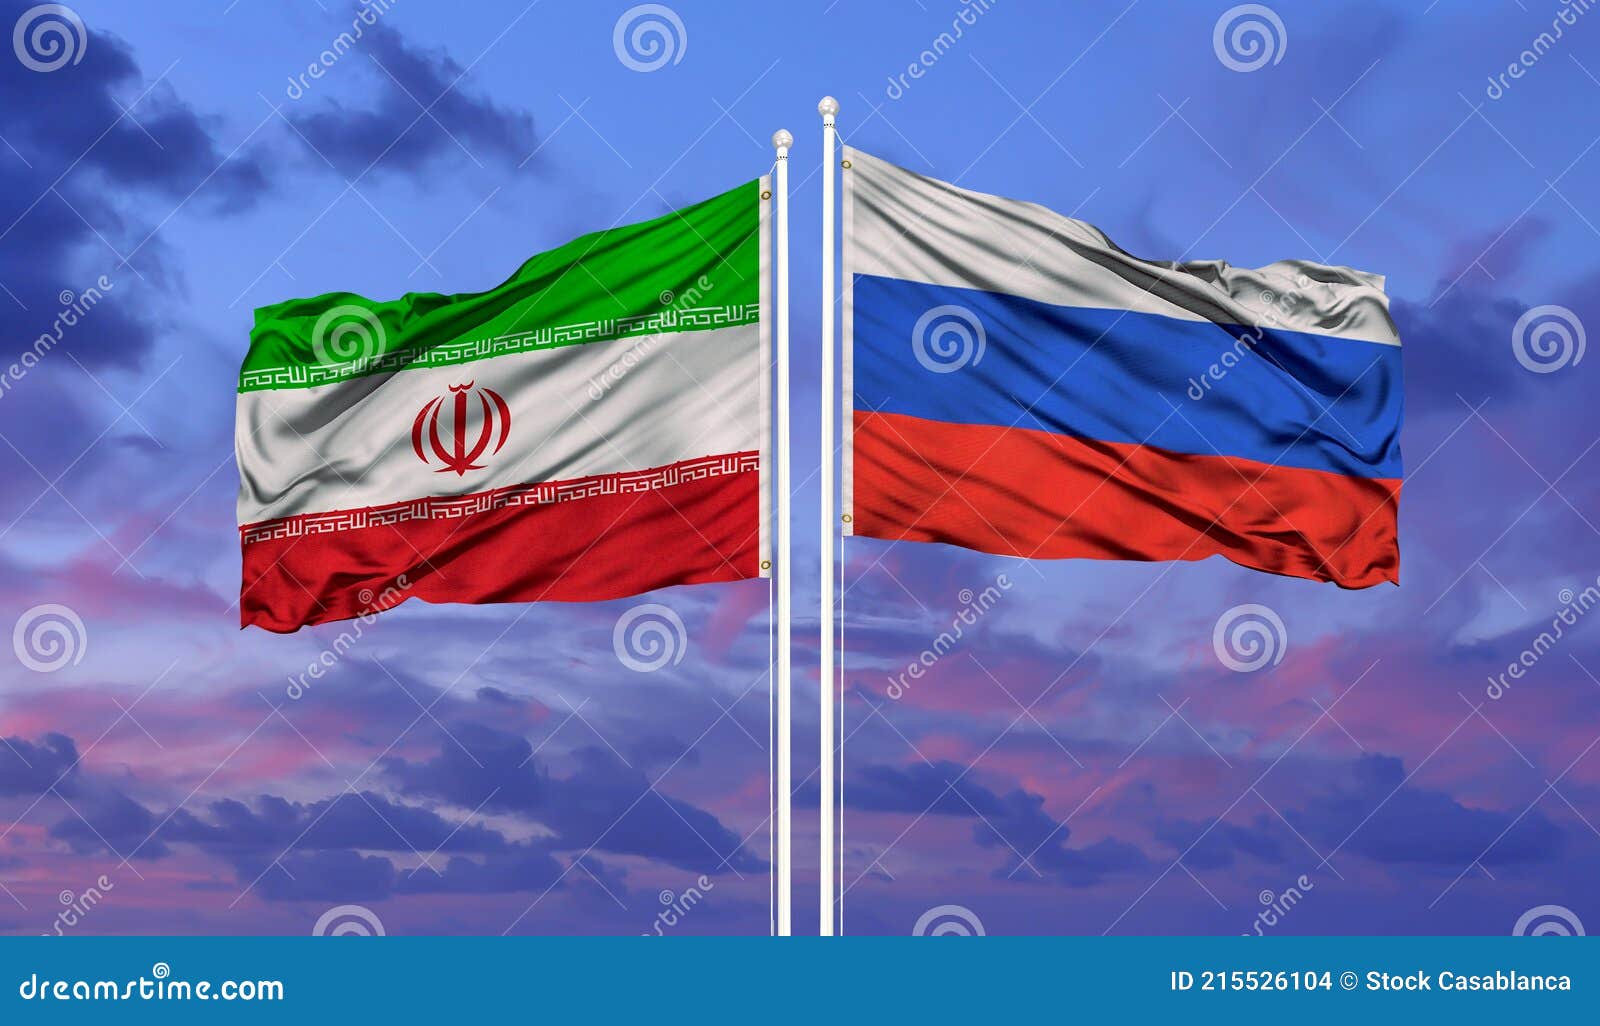 iran-russia-two-flags-flagpoles-blue-cloudy-sky-215526104.jpg